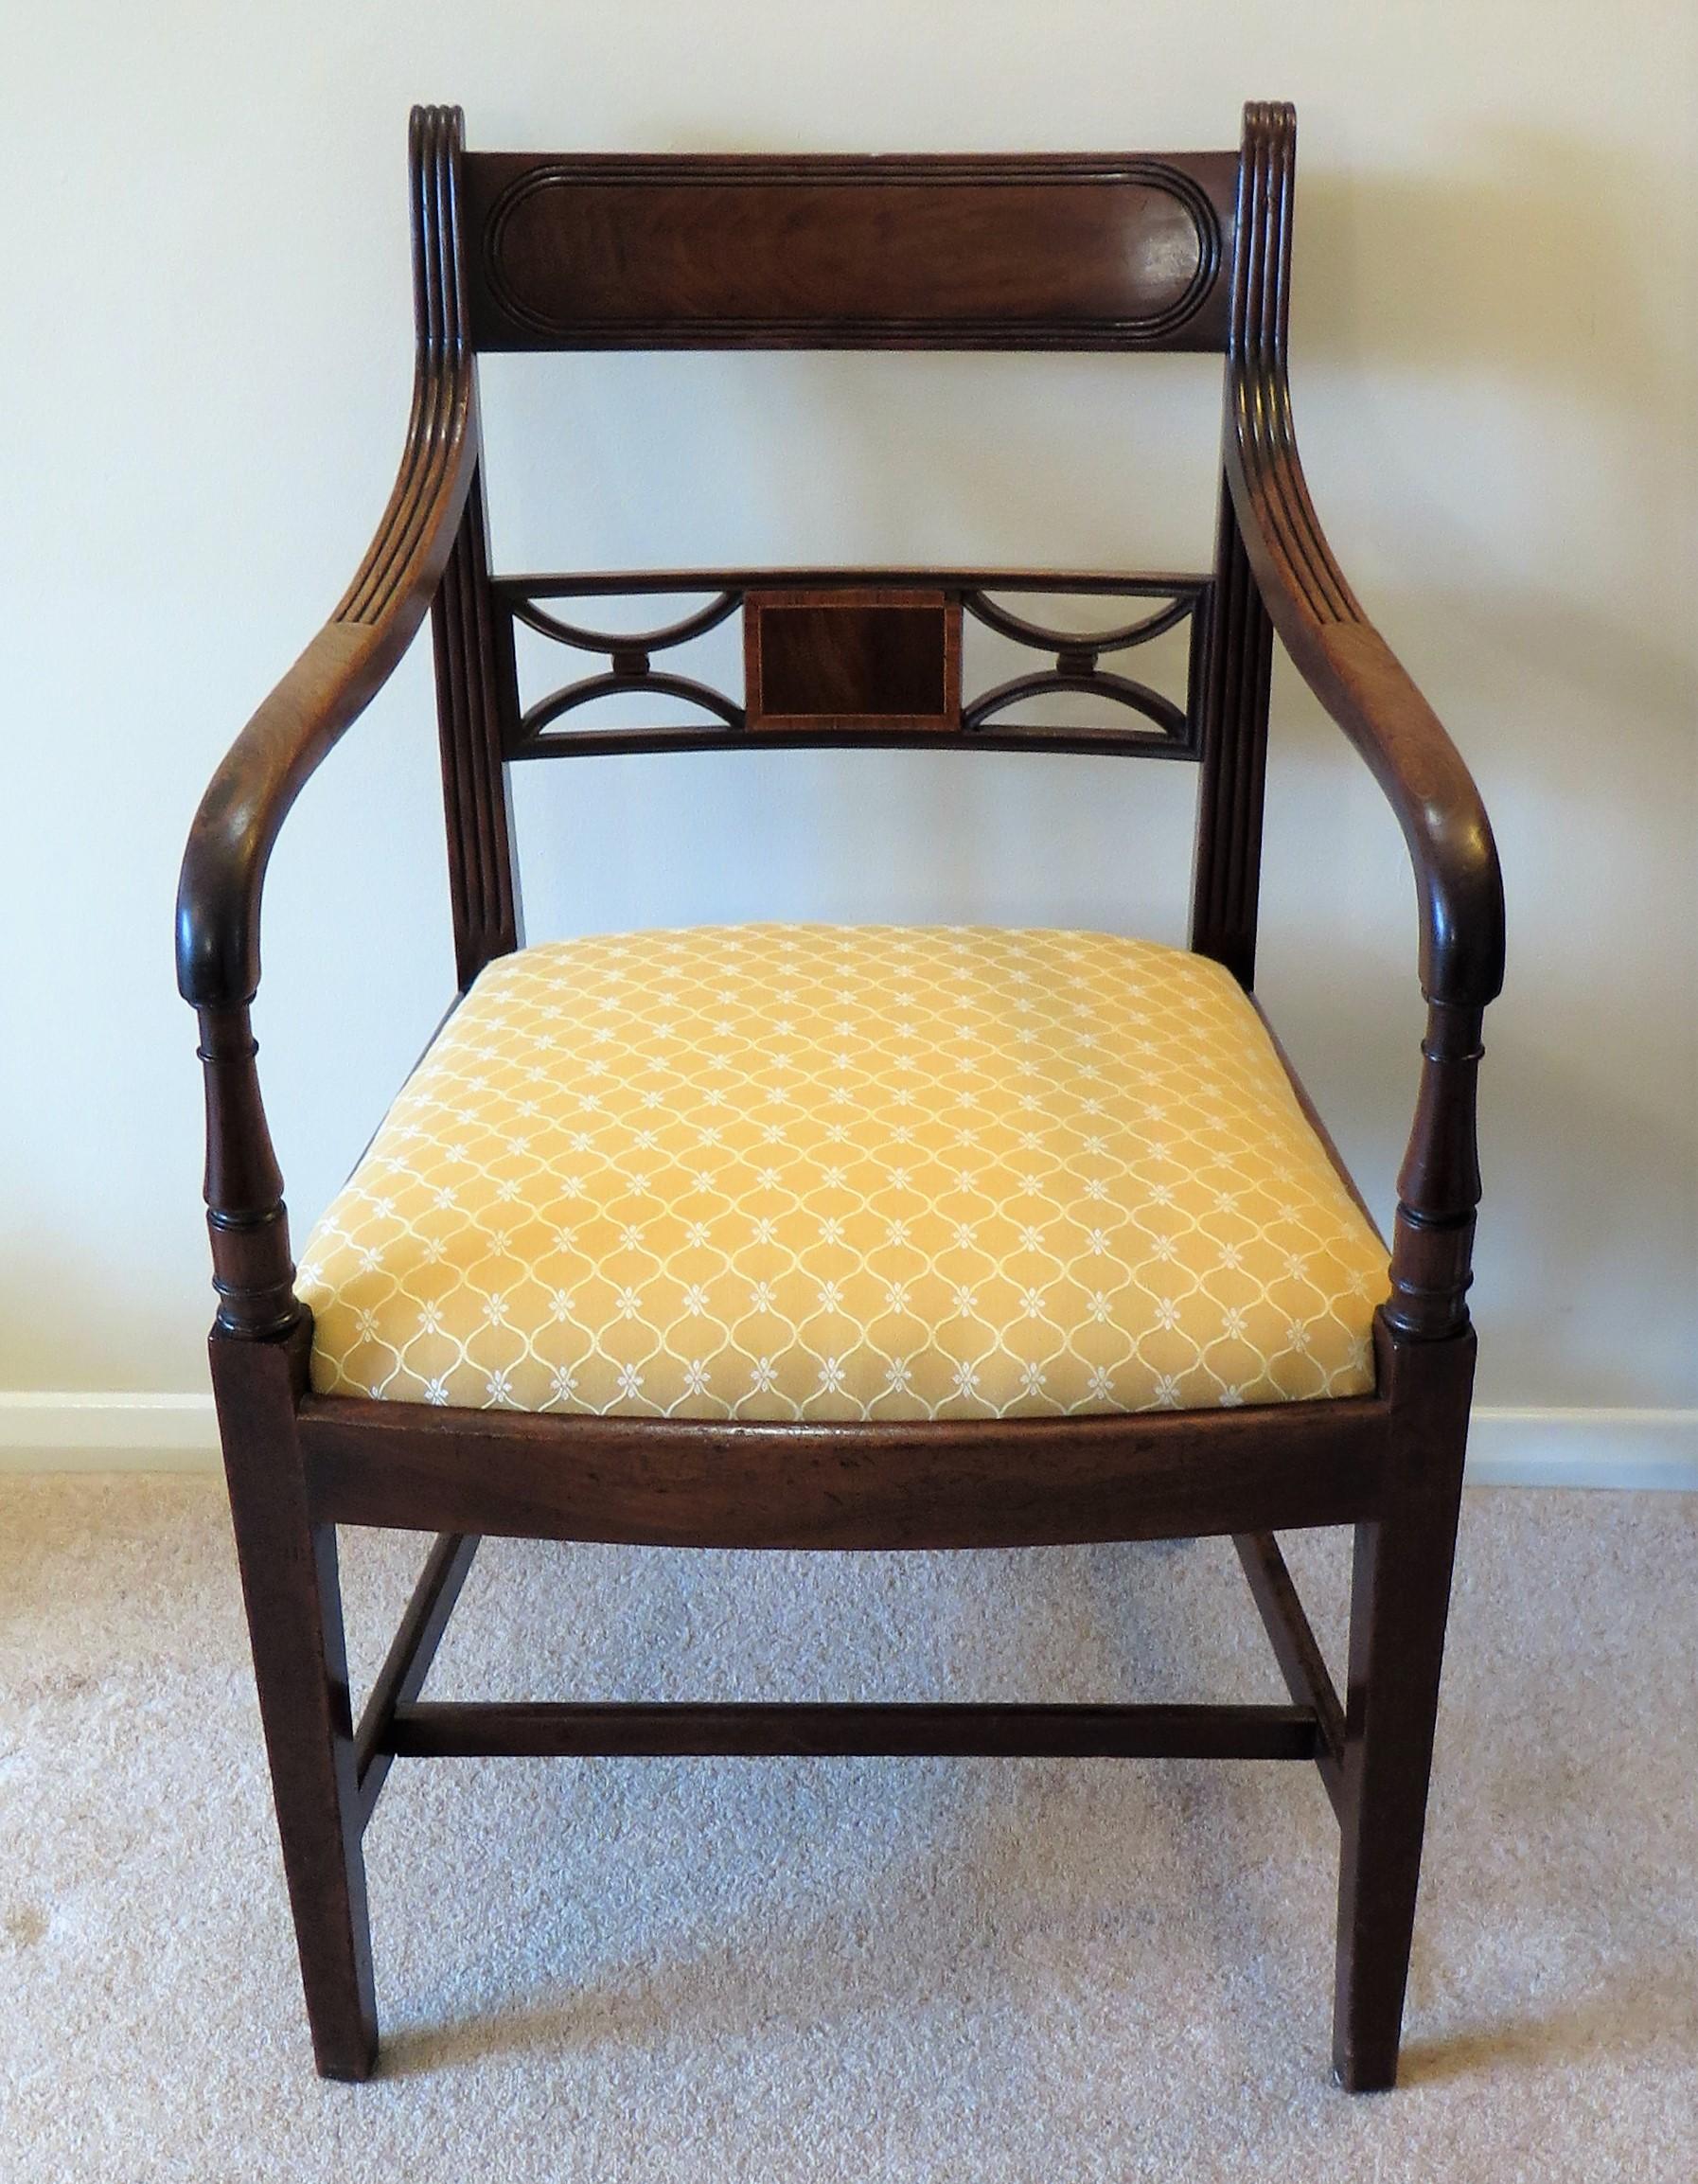 This a fine handmade English, George 111rd, Sheraton period hardwood, possibly walnut armchair with good carved detail and reupholstered drop in seat, dating to the late 18th century, circa 1790.

The whole piece is well executed with a lightness of